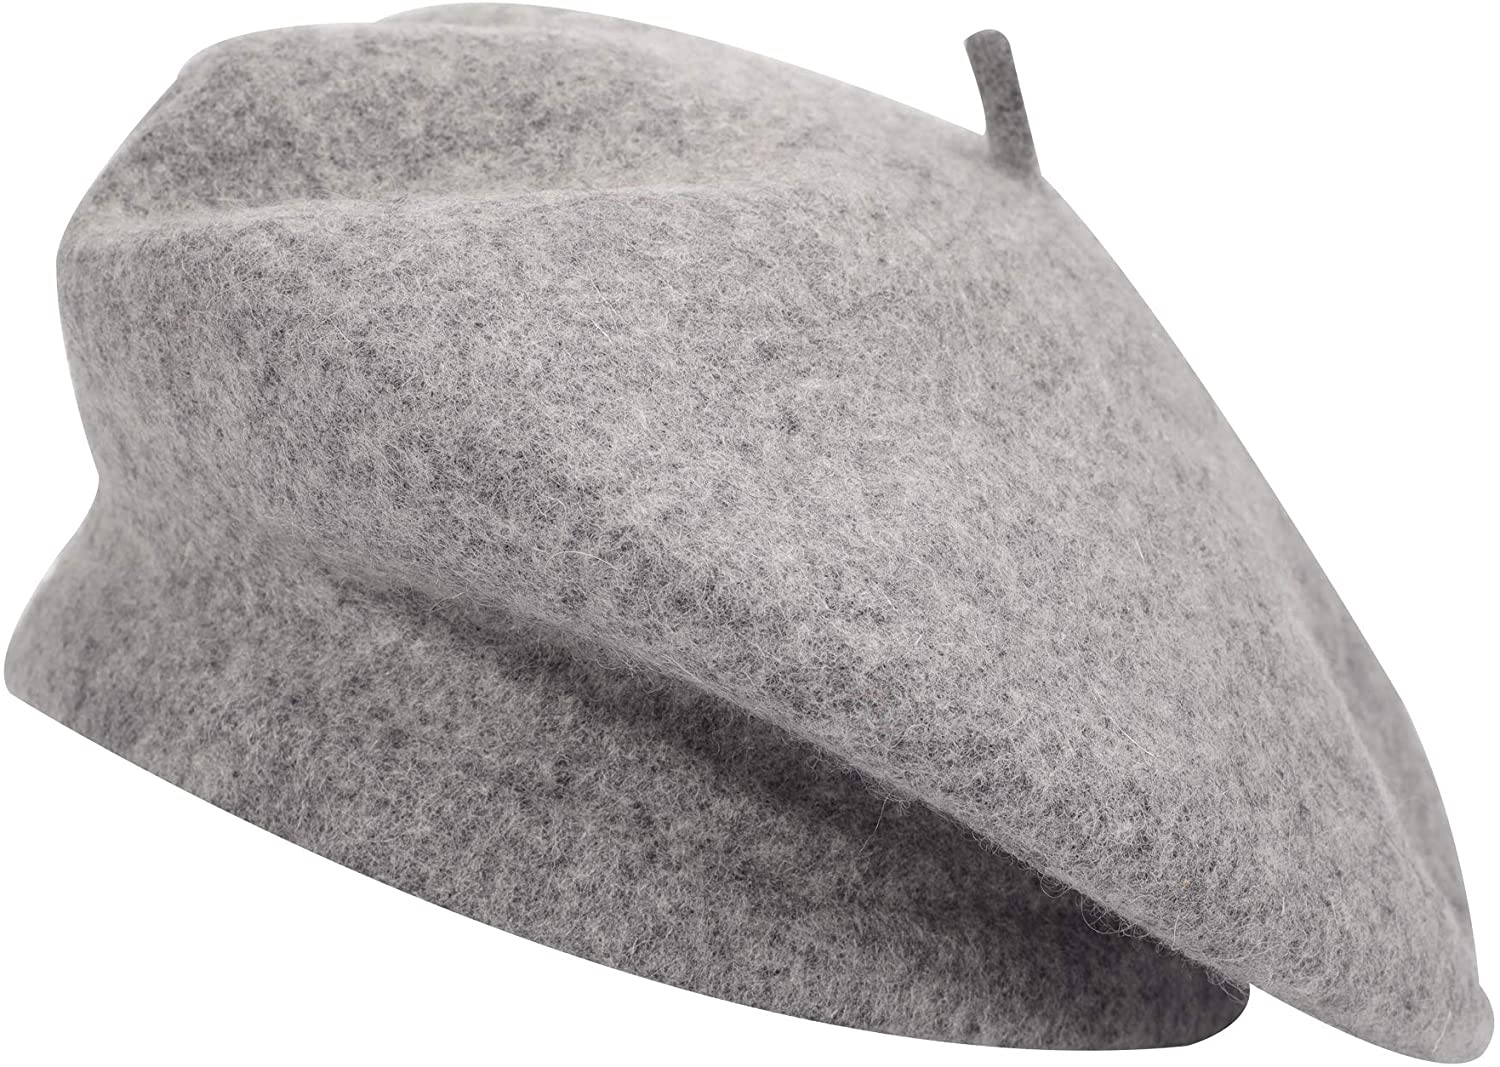 ZLYC French Beret hat Reversible Solid Color Cashmere Knit Warm Beret Cap for Womens Girls 